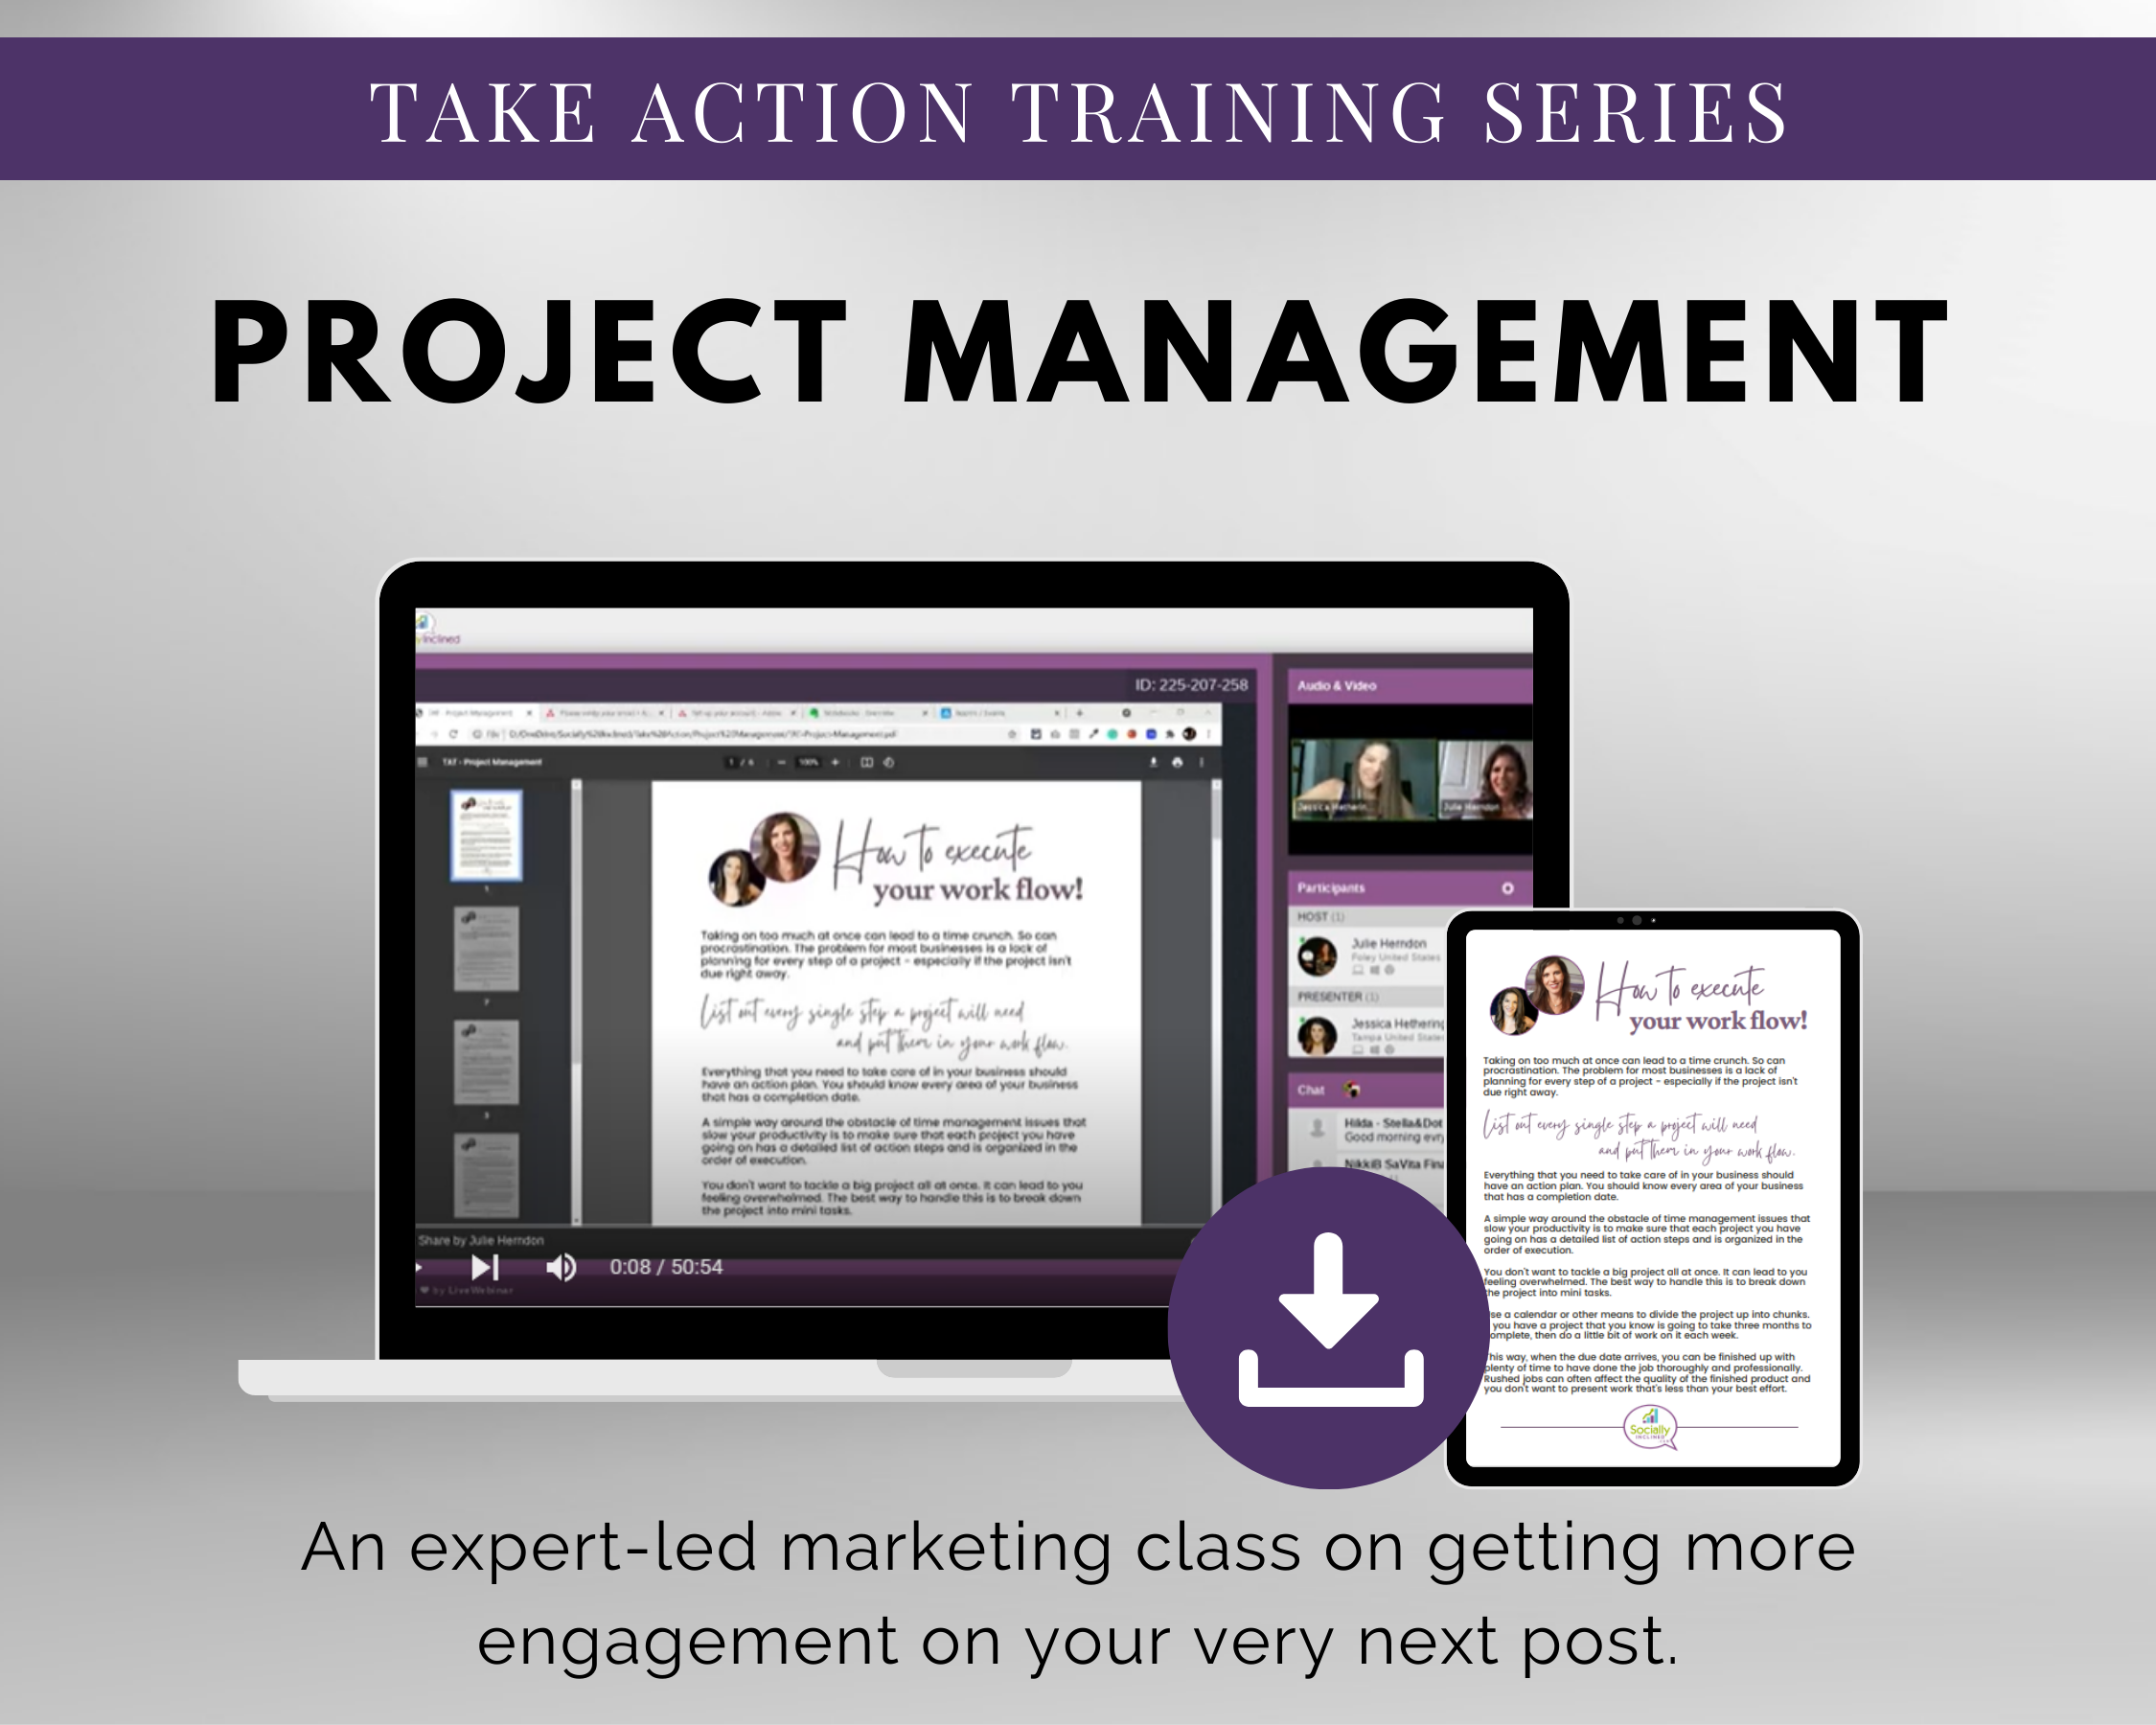 The Get Socially Inclined - TAT Project Management Masterclass focuses on project management.